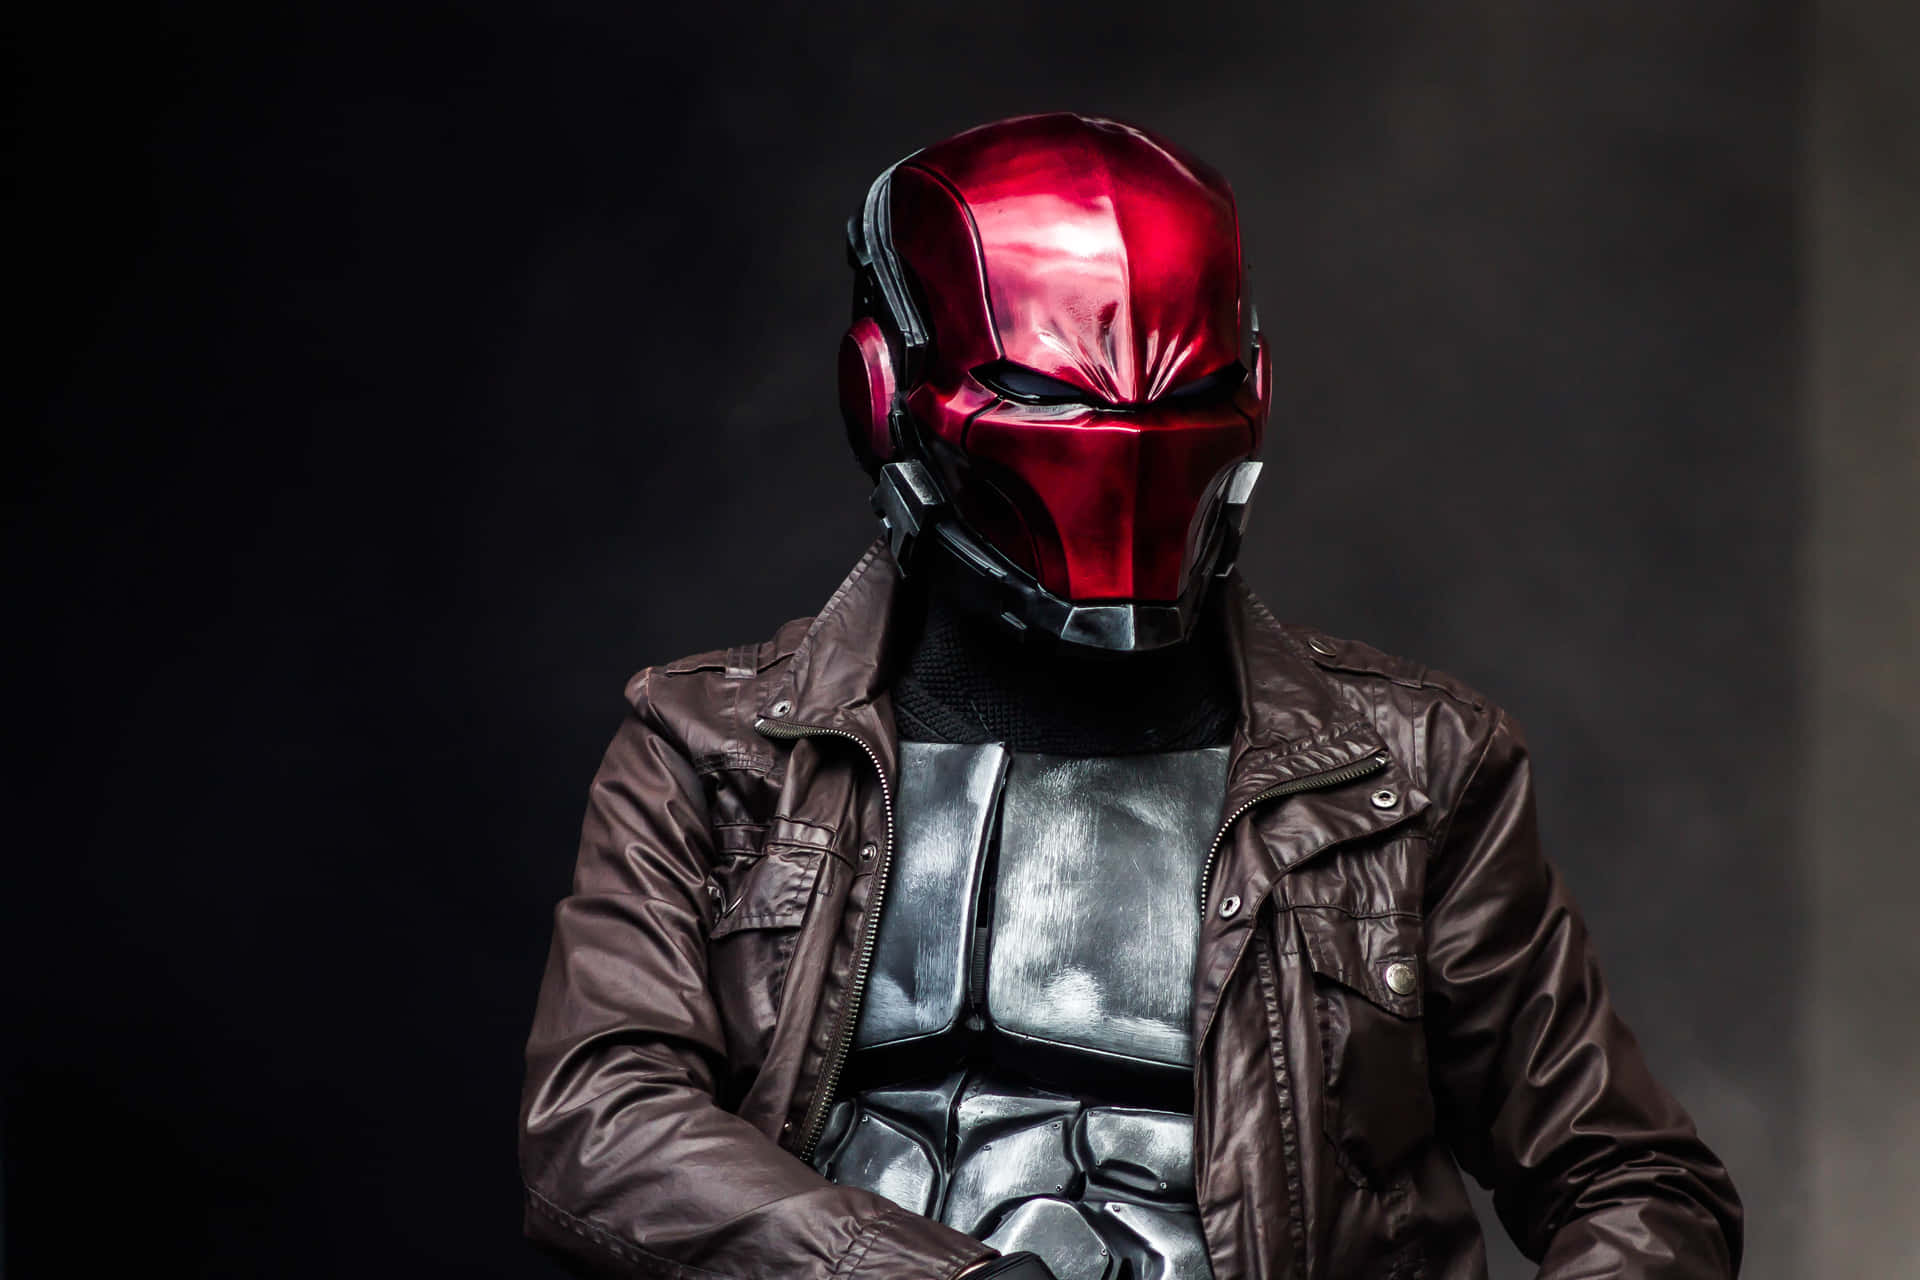 A dark silhouette against a burning sky, Red Hood stands tall, ready to face whatever lies ahead.